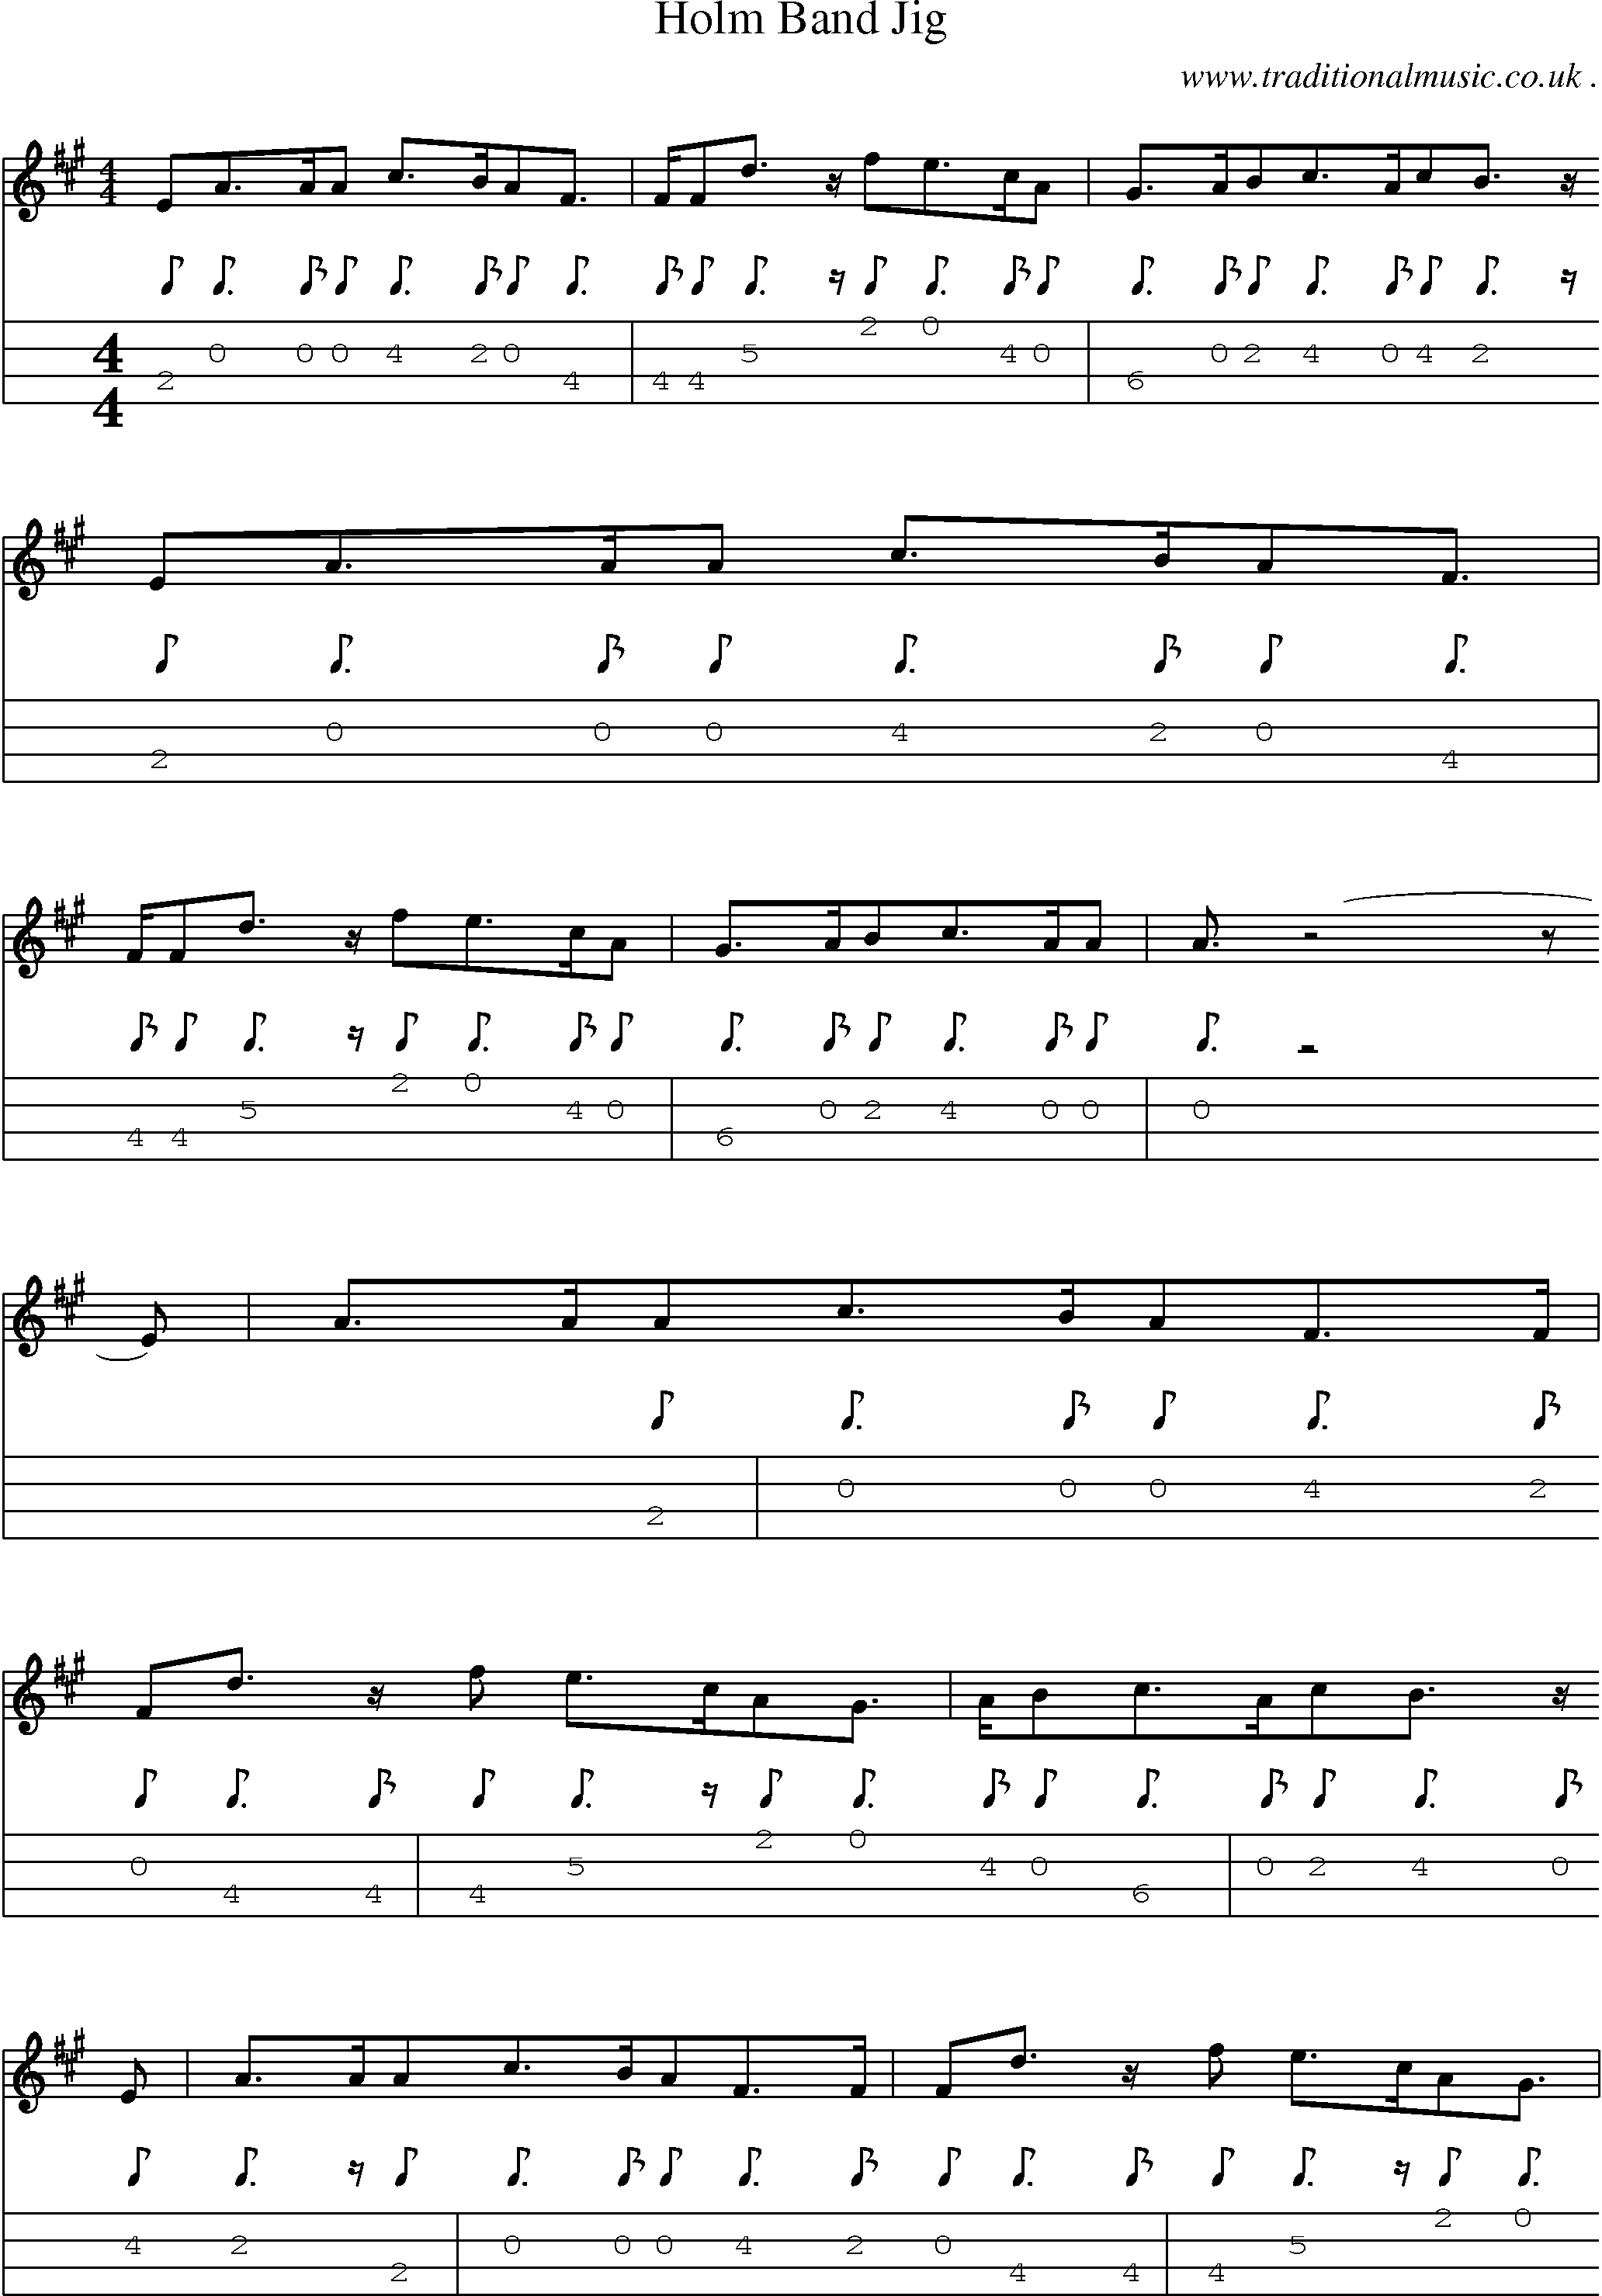 Sheet-music  score, Chords and Mandolin Tabs for Holm Band Jig